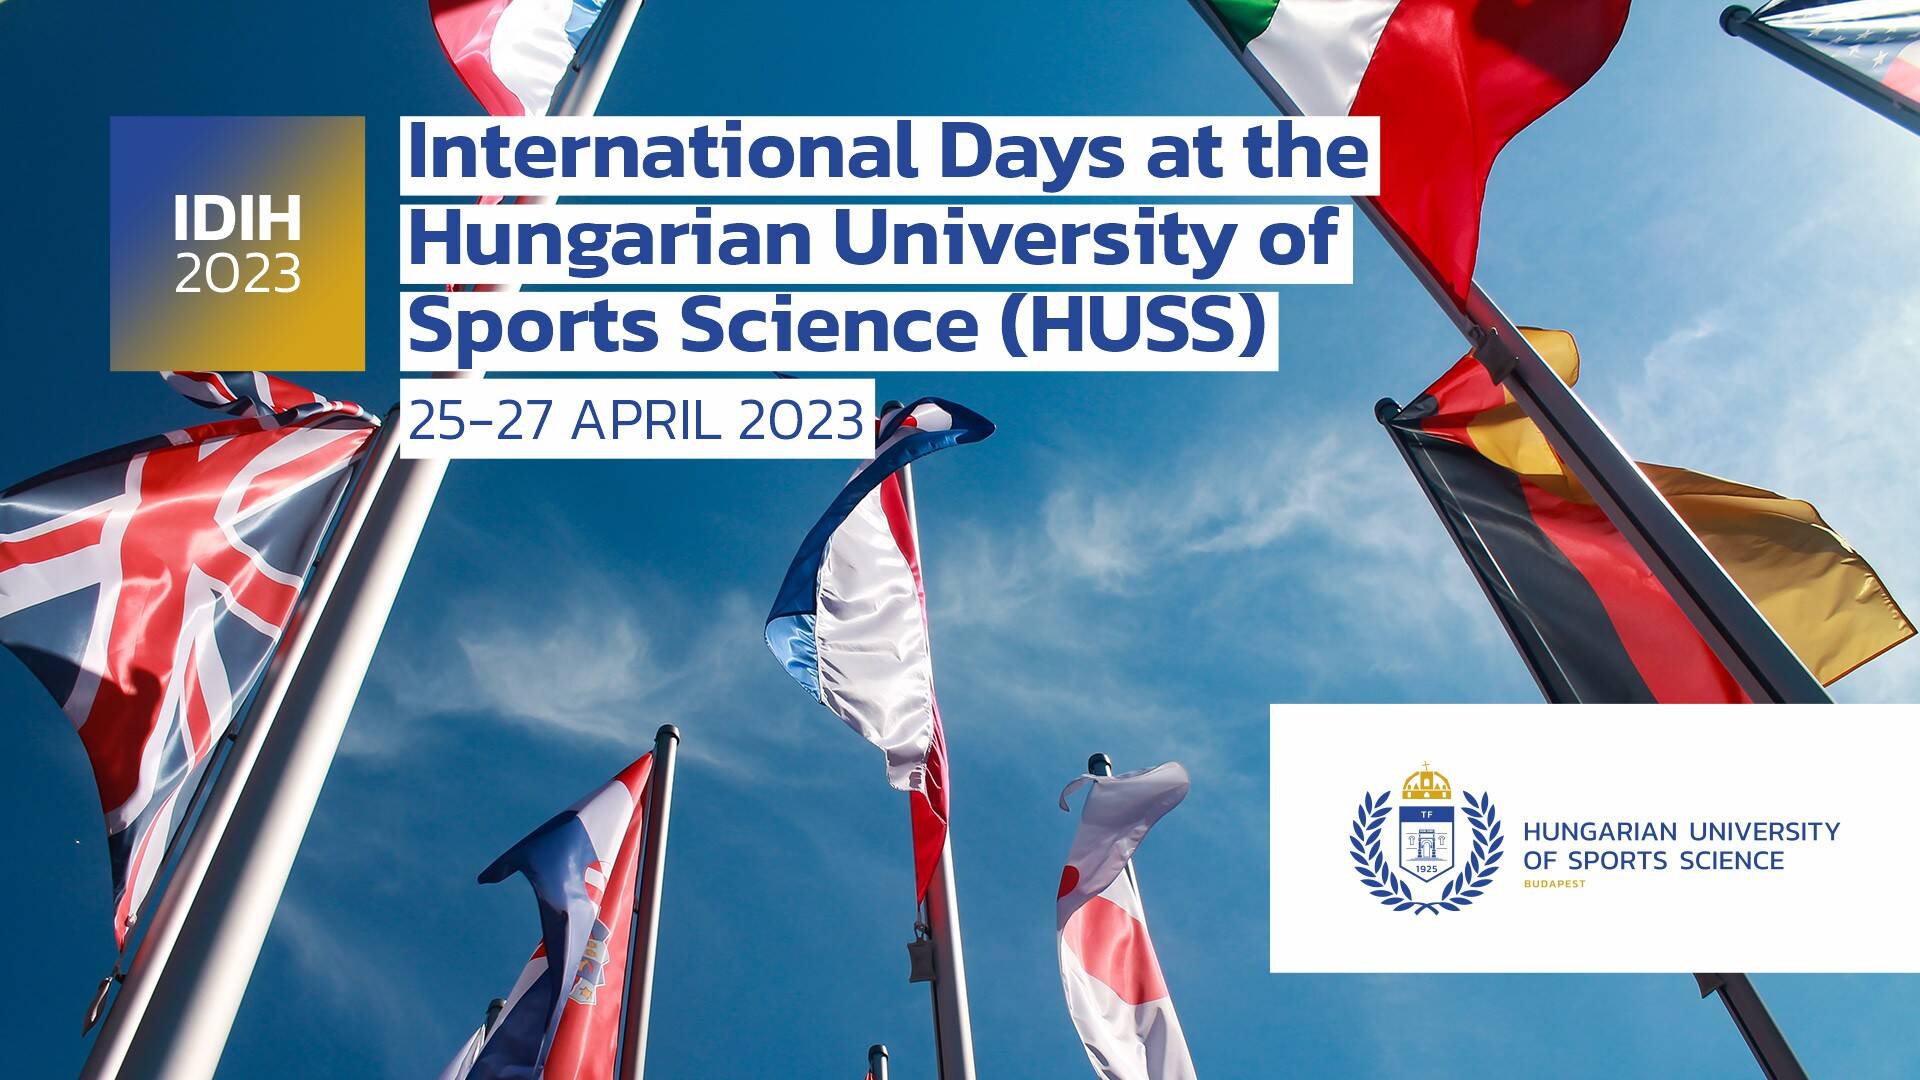 Programme for the International Days in HUSS 2023 (IDIH 2023) completed